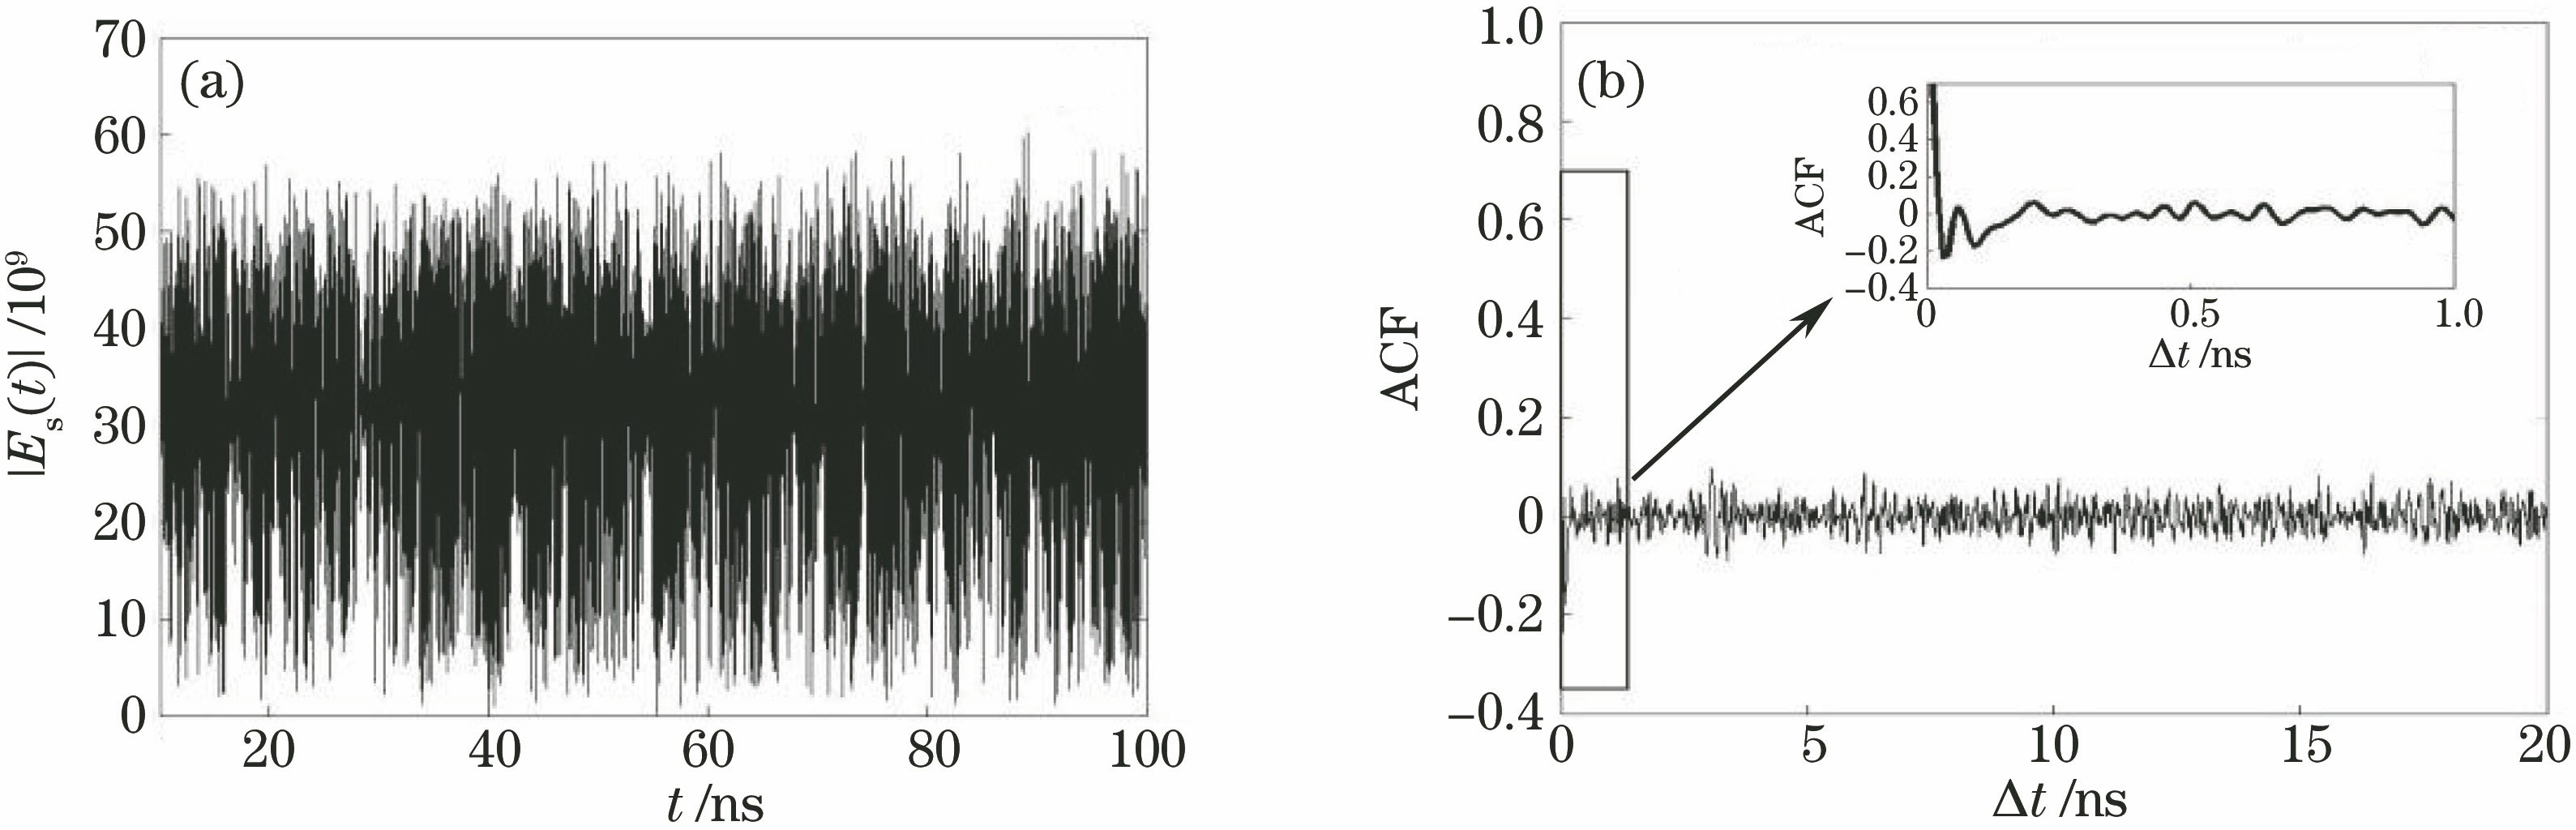 Time series and corresponding ACF curve of chaotic laser from S-DFB-SL when τ1=2.78 ns. (a) Time series; (b) ACF curve